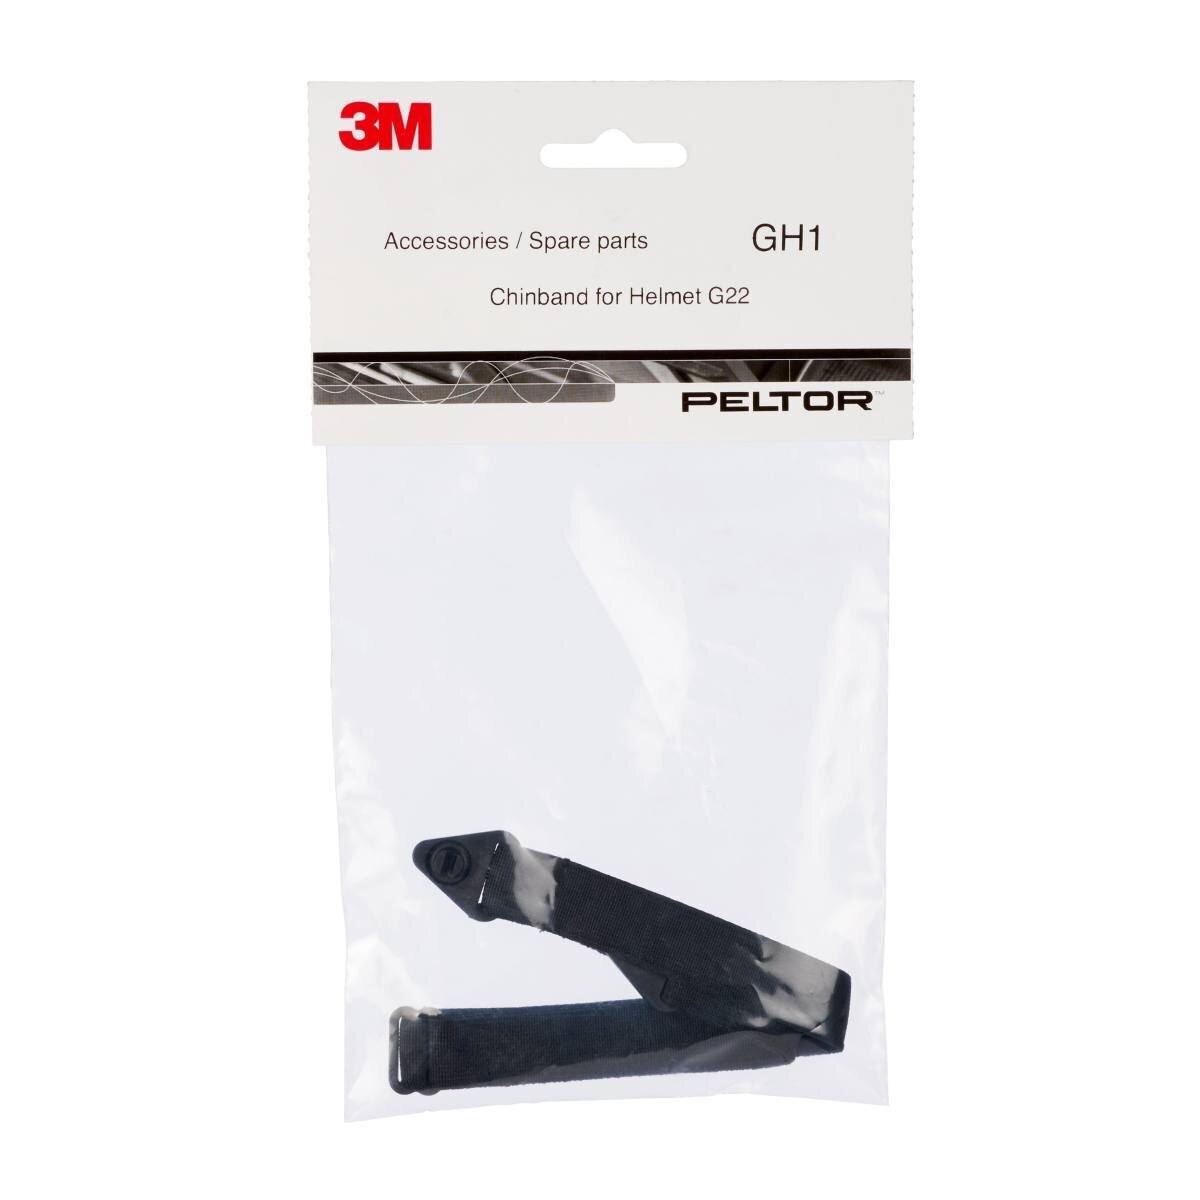 3M GH1 chin strap, 2-point attachment for 3M safety helmets G22 and G3000